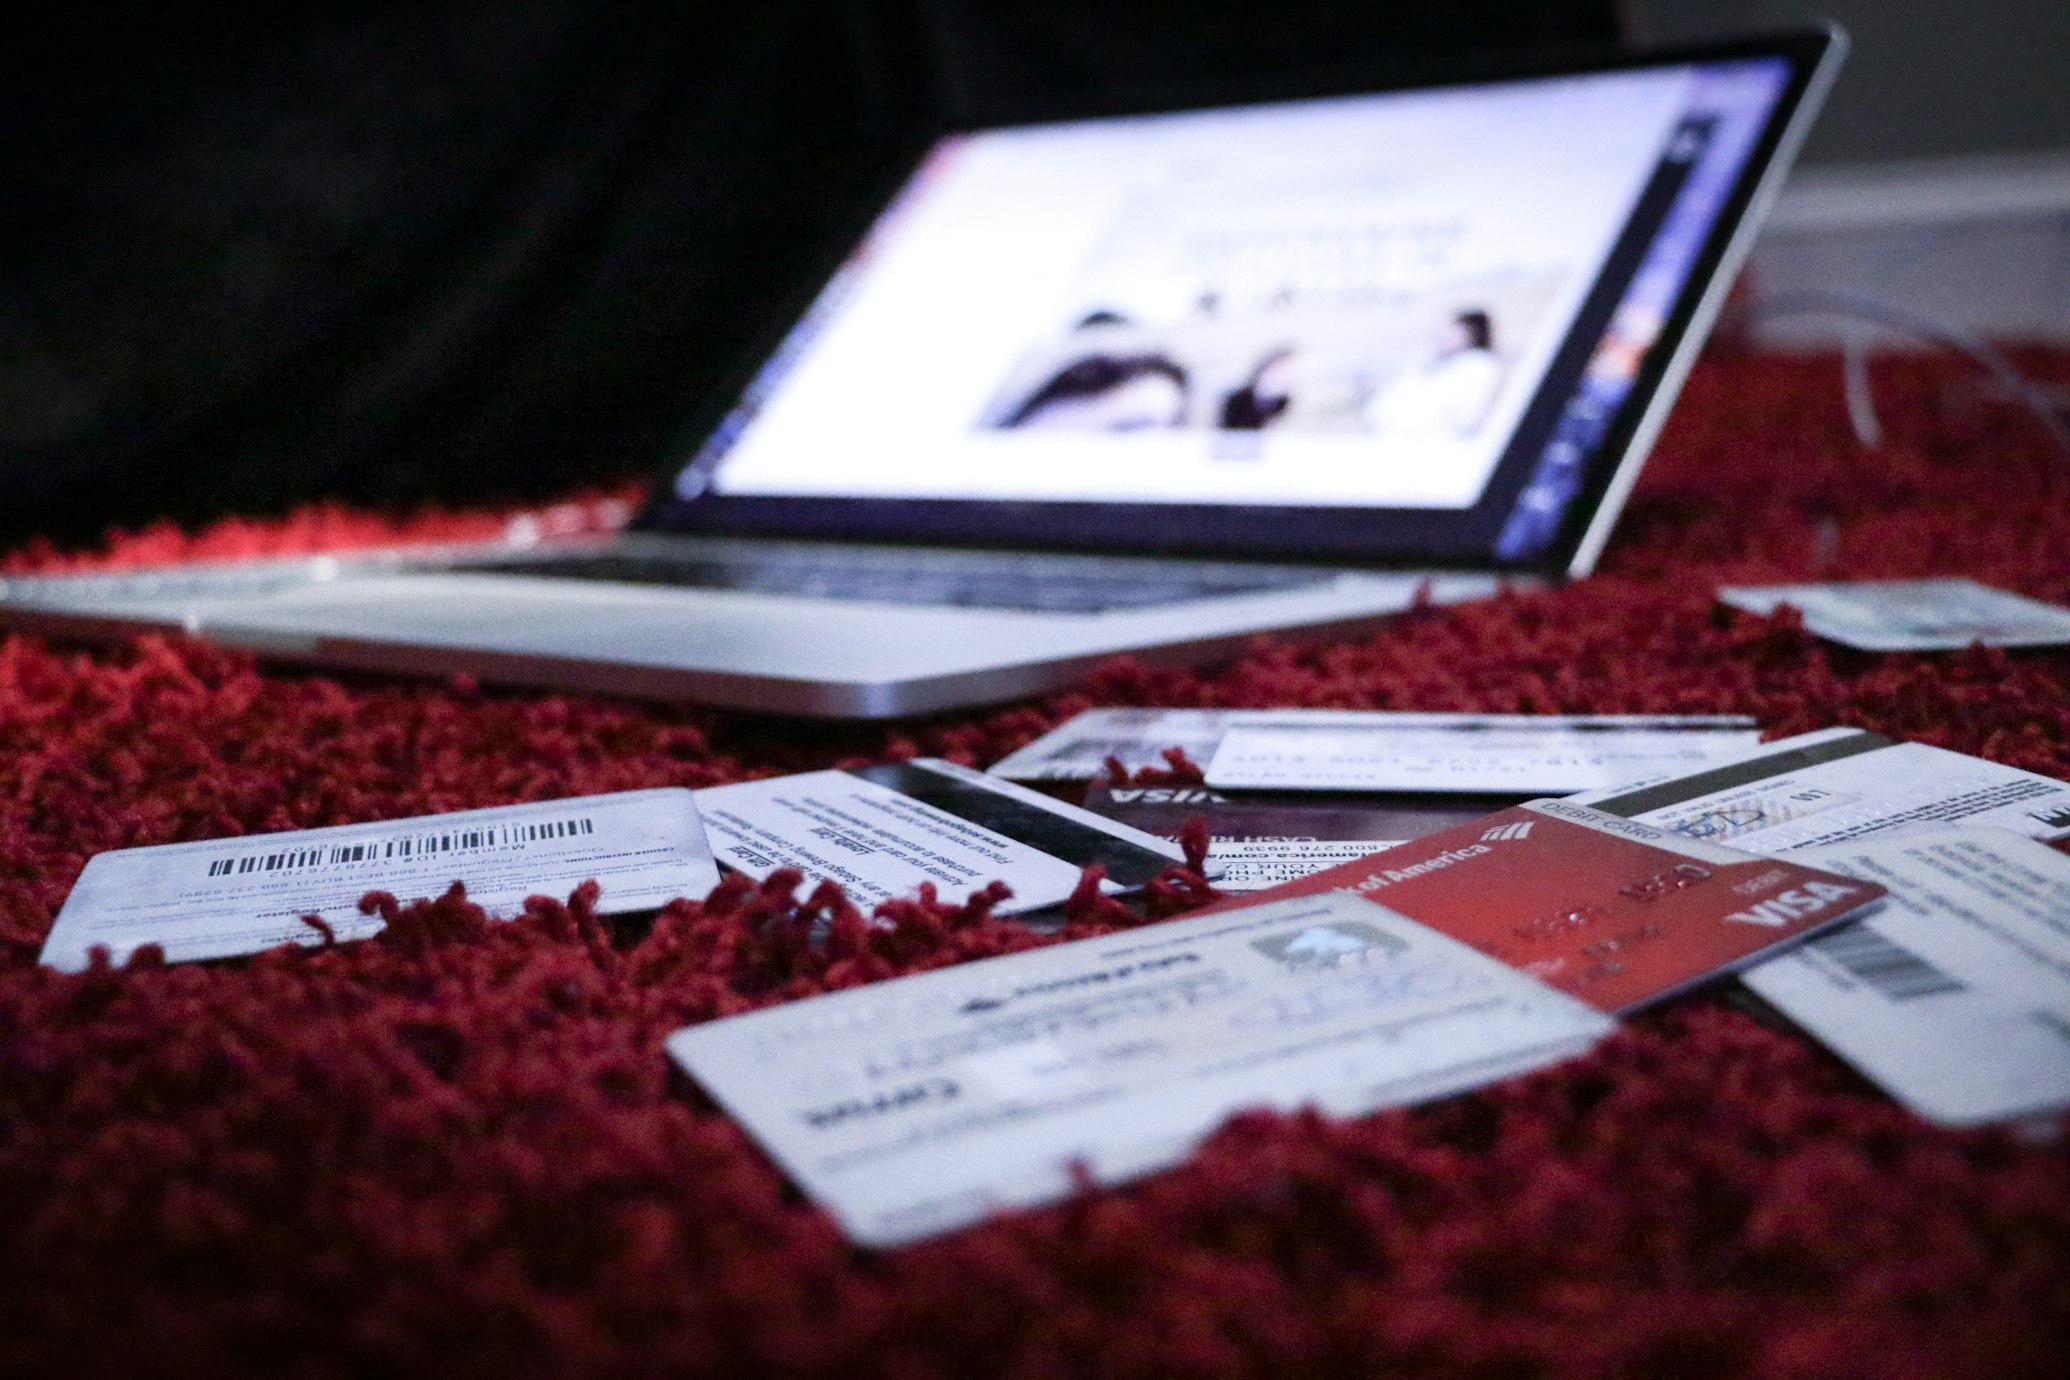 photo of laptop and credit cards on red rug